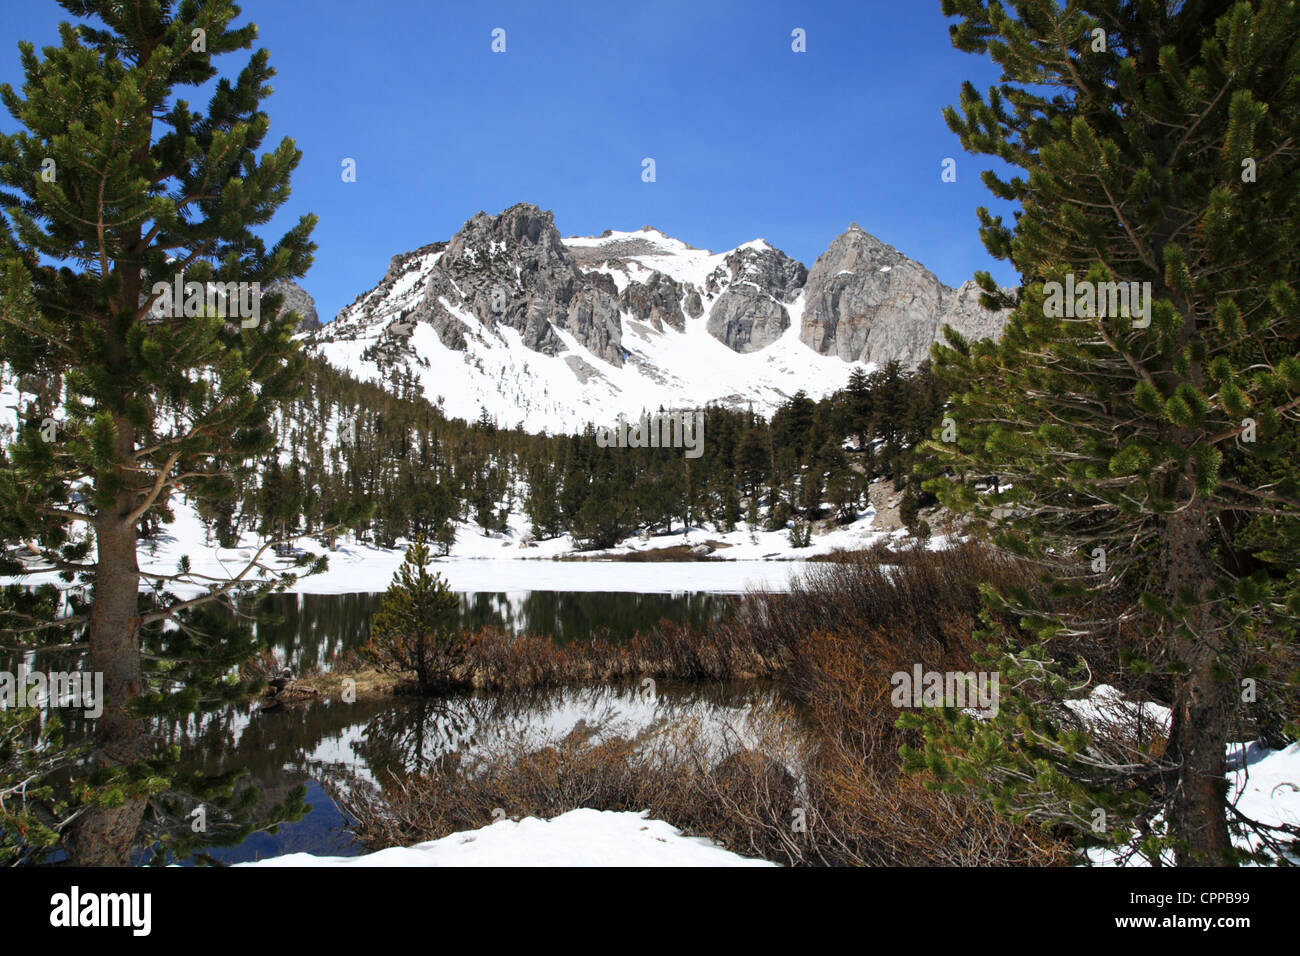 snowy mountain and lake in the Sierra Nevada mountains Stock Photo